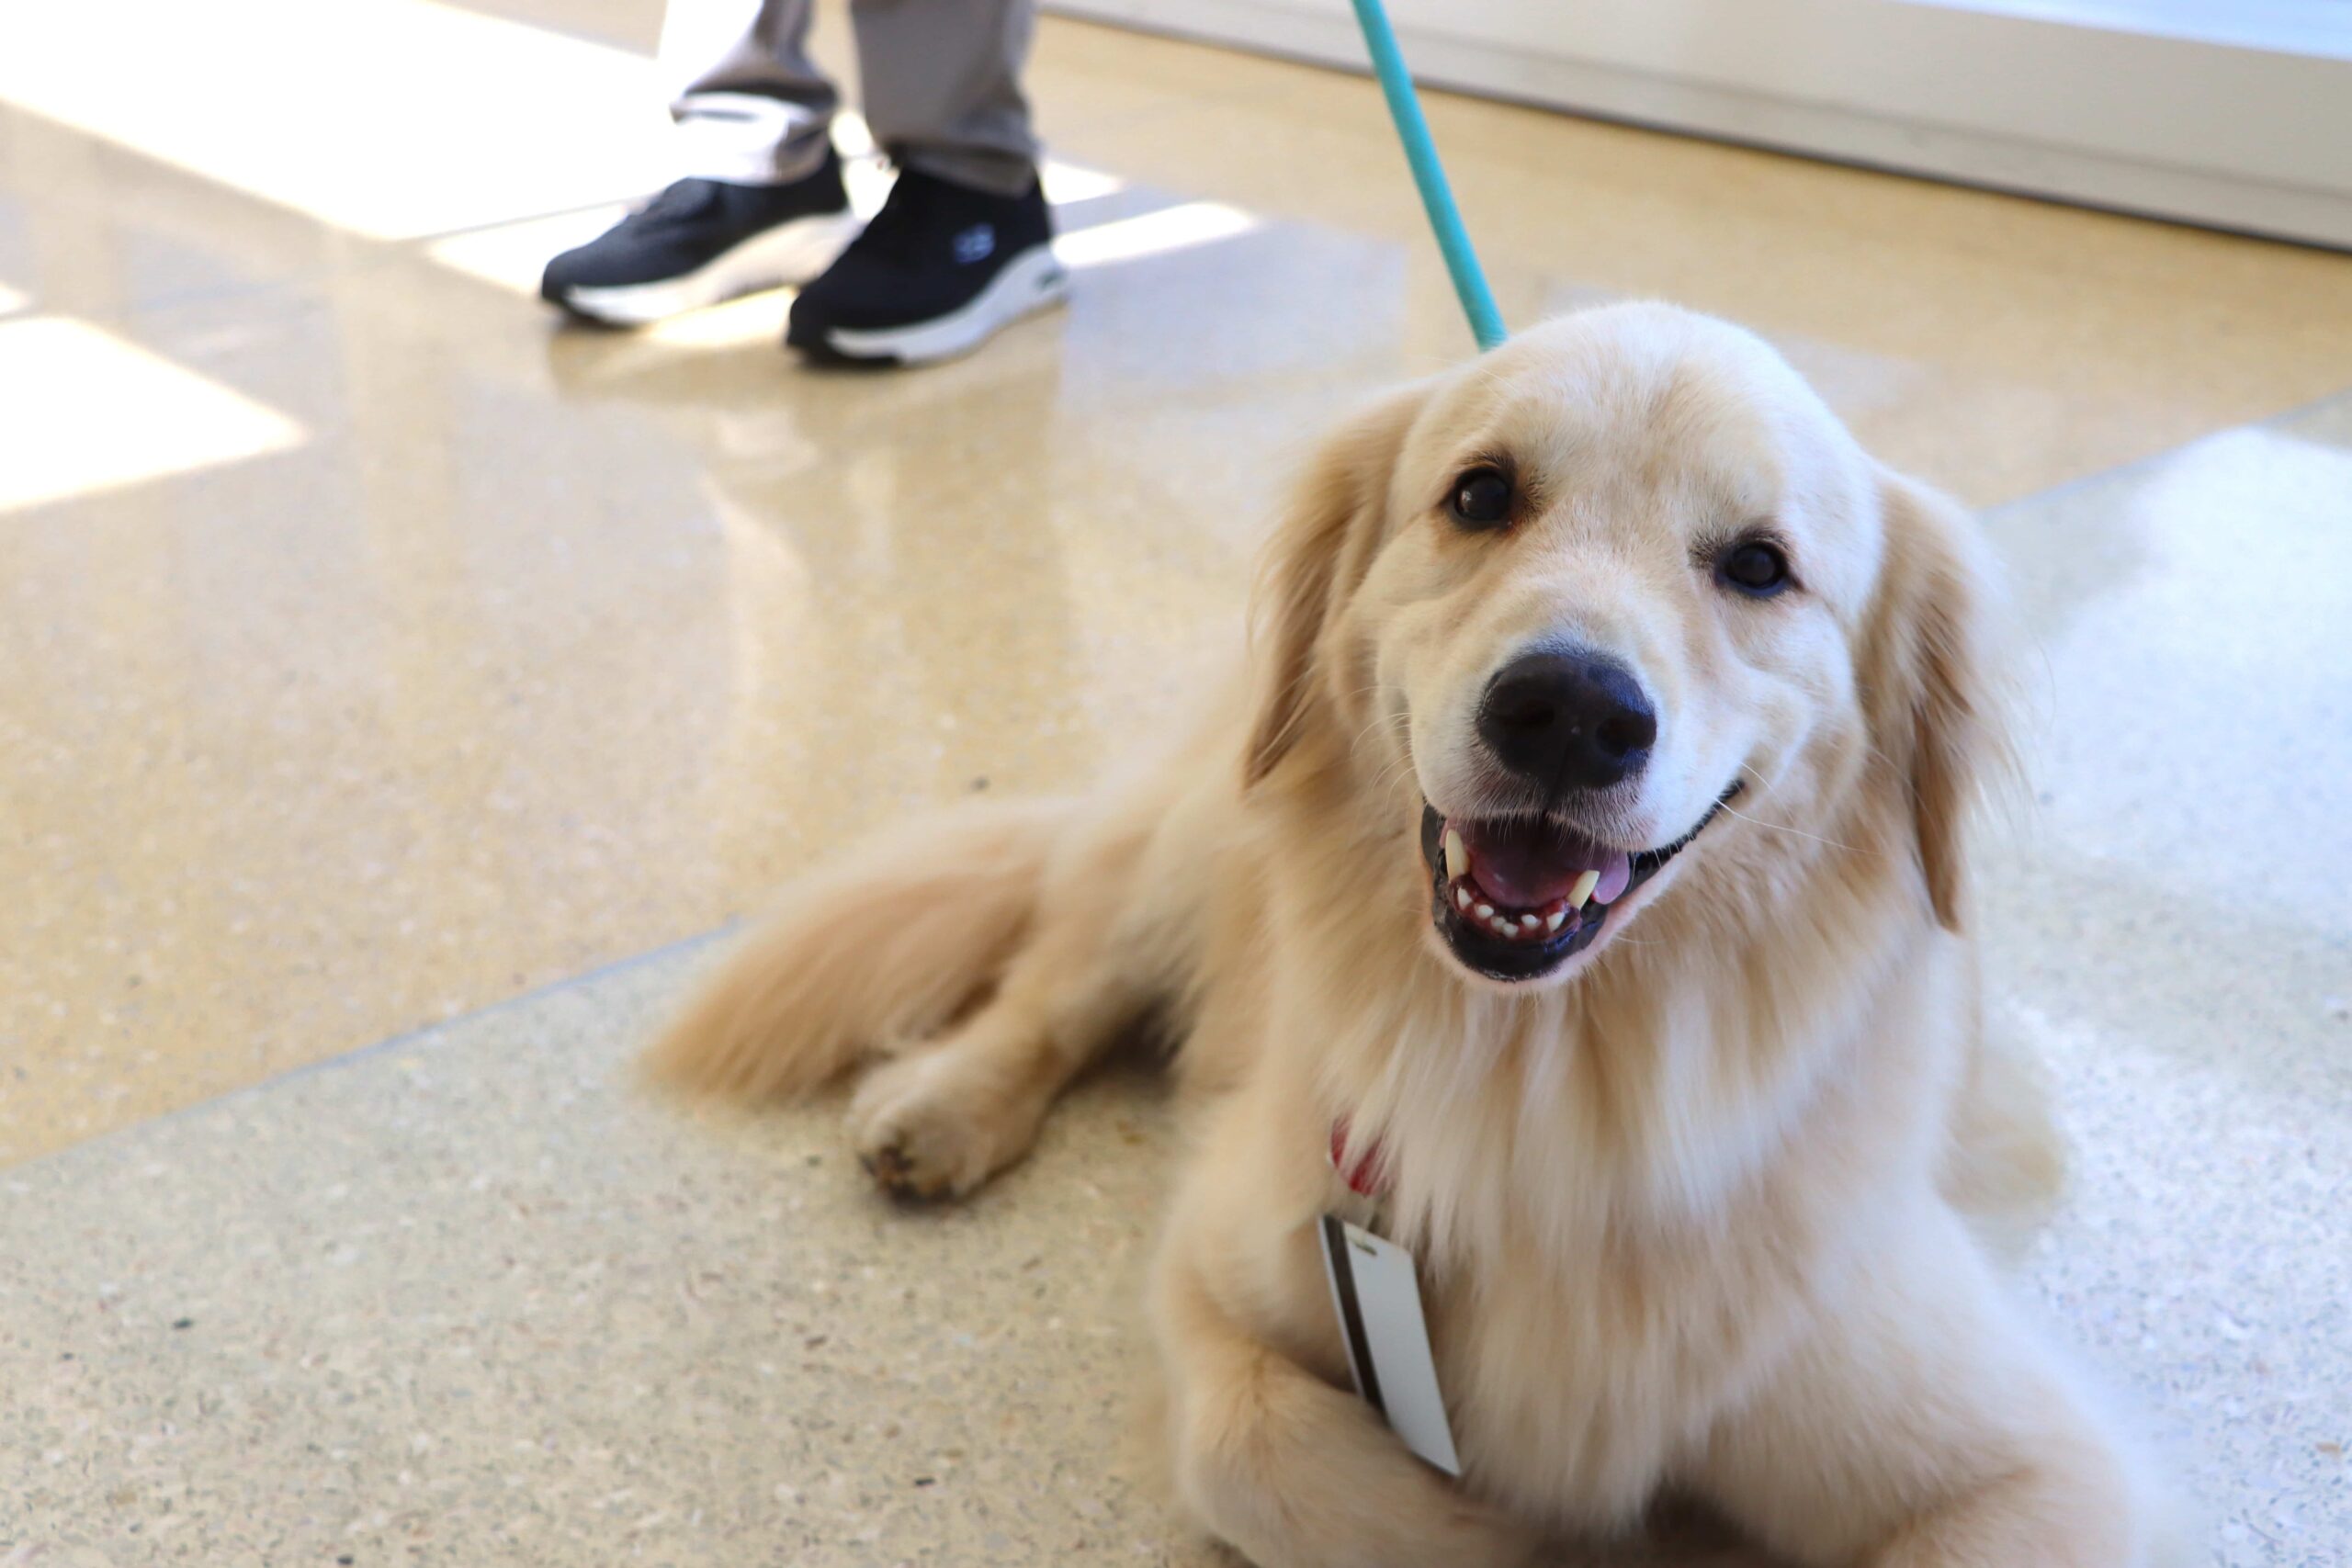 Four paws and a big heart: Therapy dog, handler spread cheer at cancer hospital